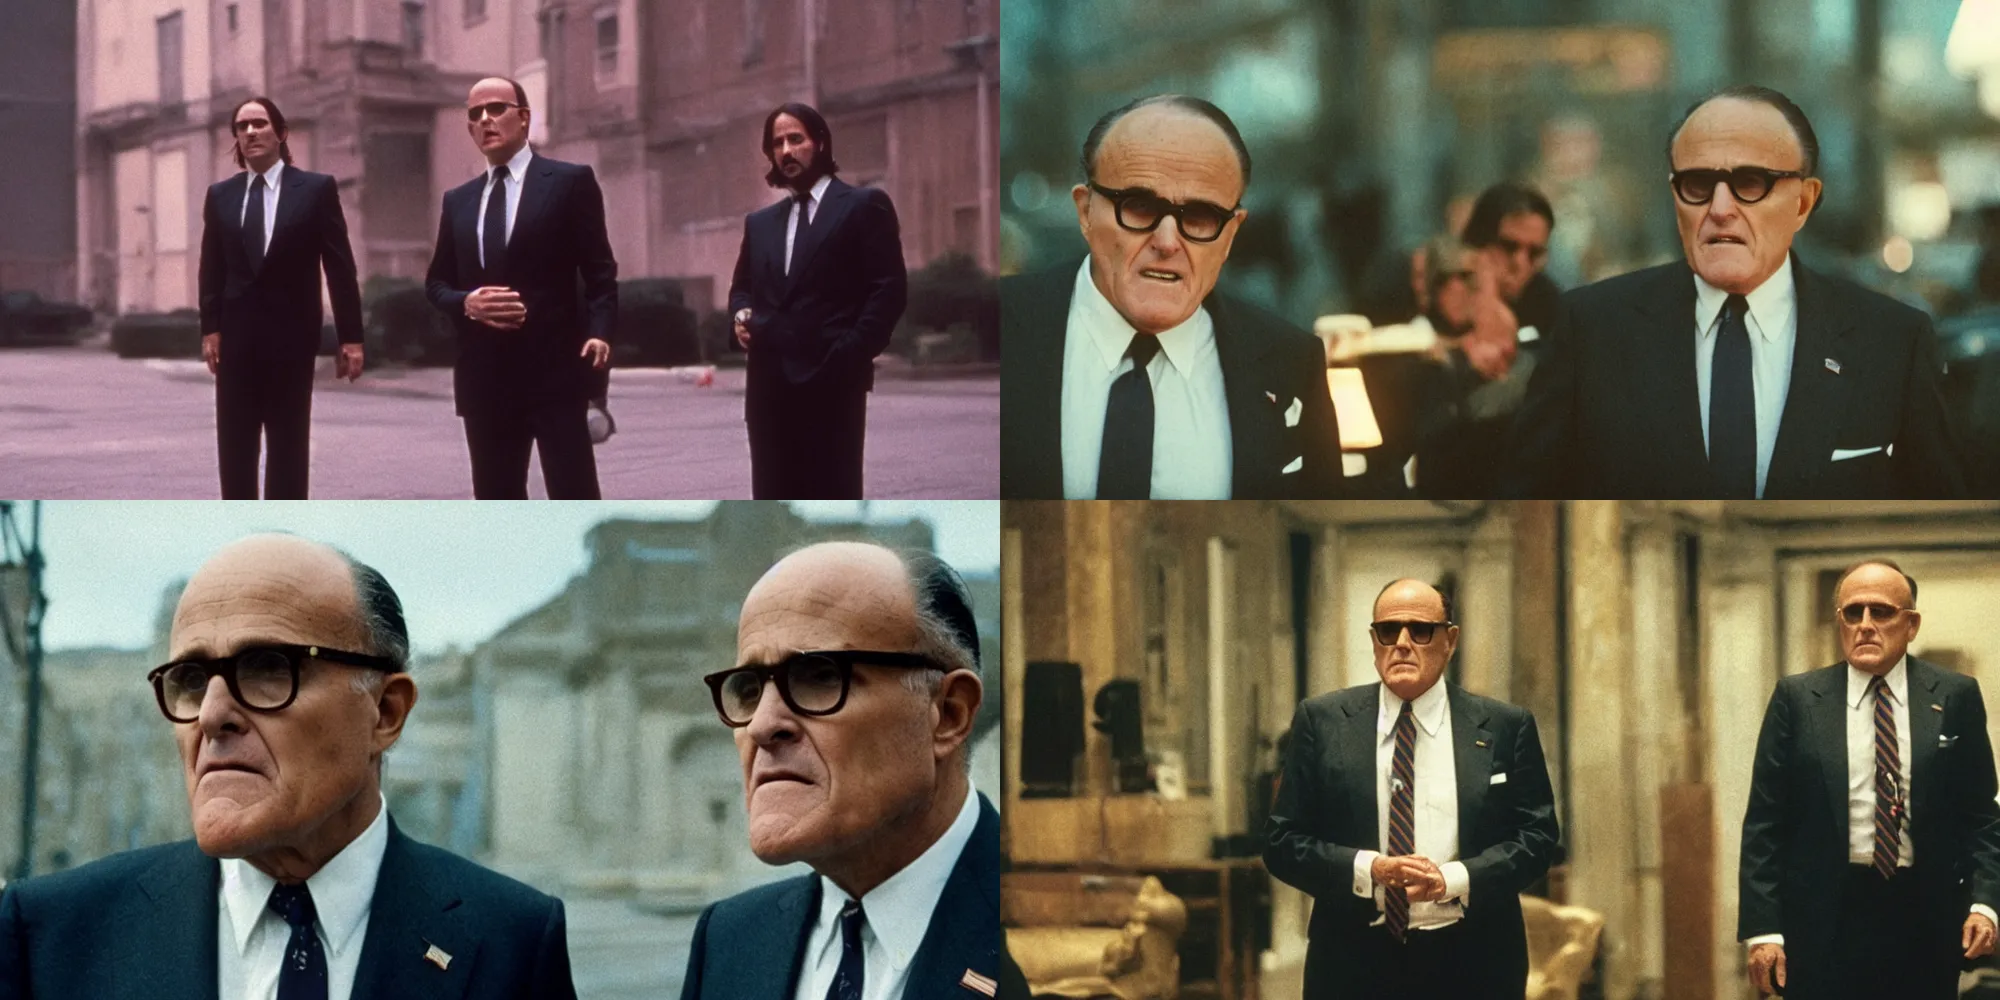 Prompt: rudy giuliani in john wick shootout directed by wes anderson, cinestill 8 0 0 t, 1 9 8 0 s movie still, film grain